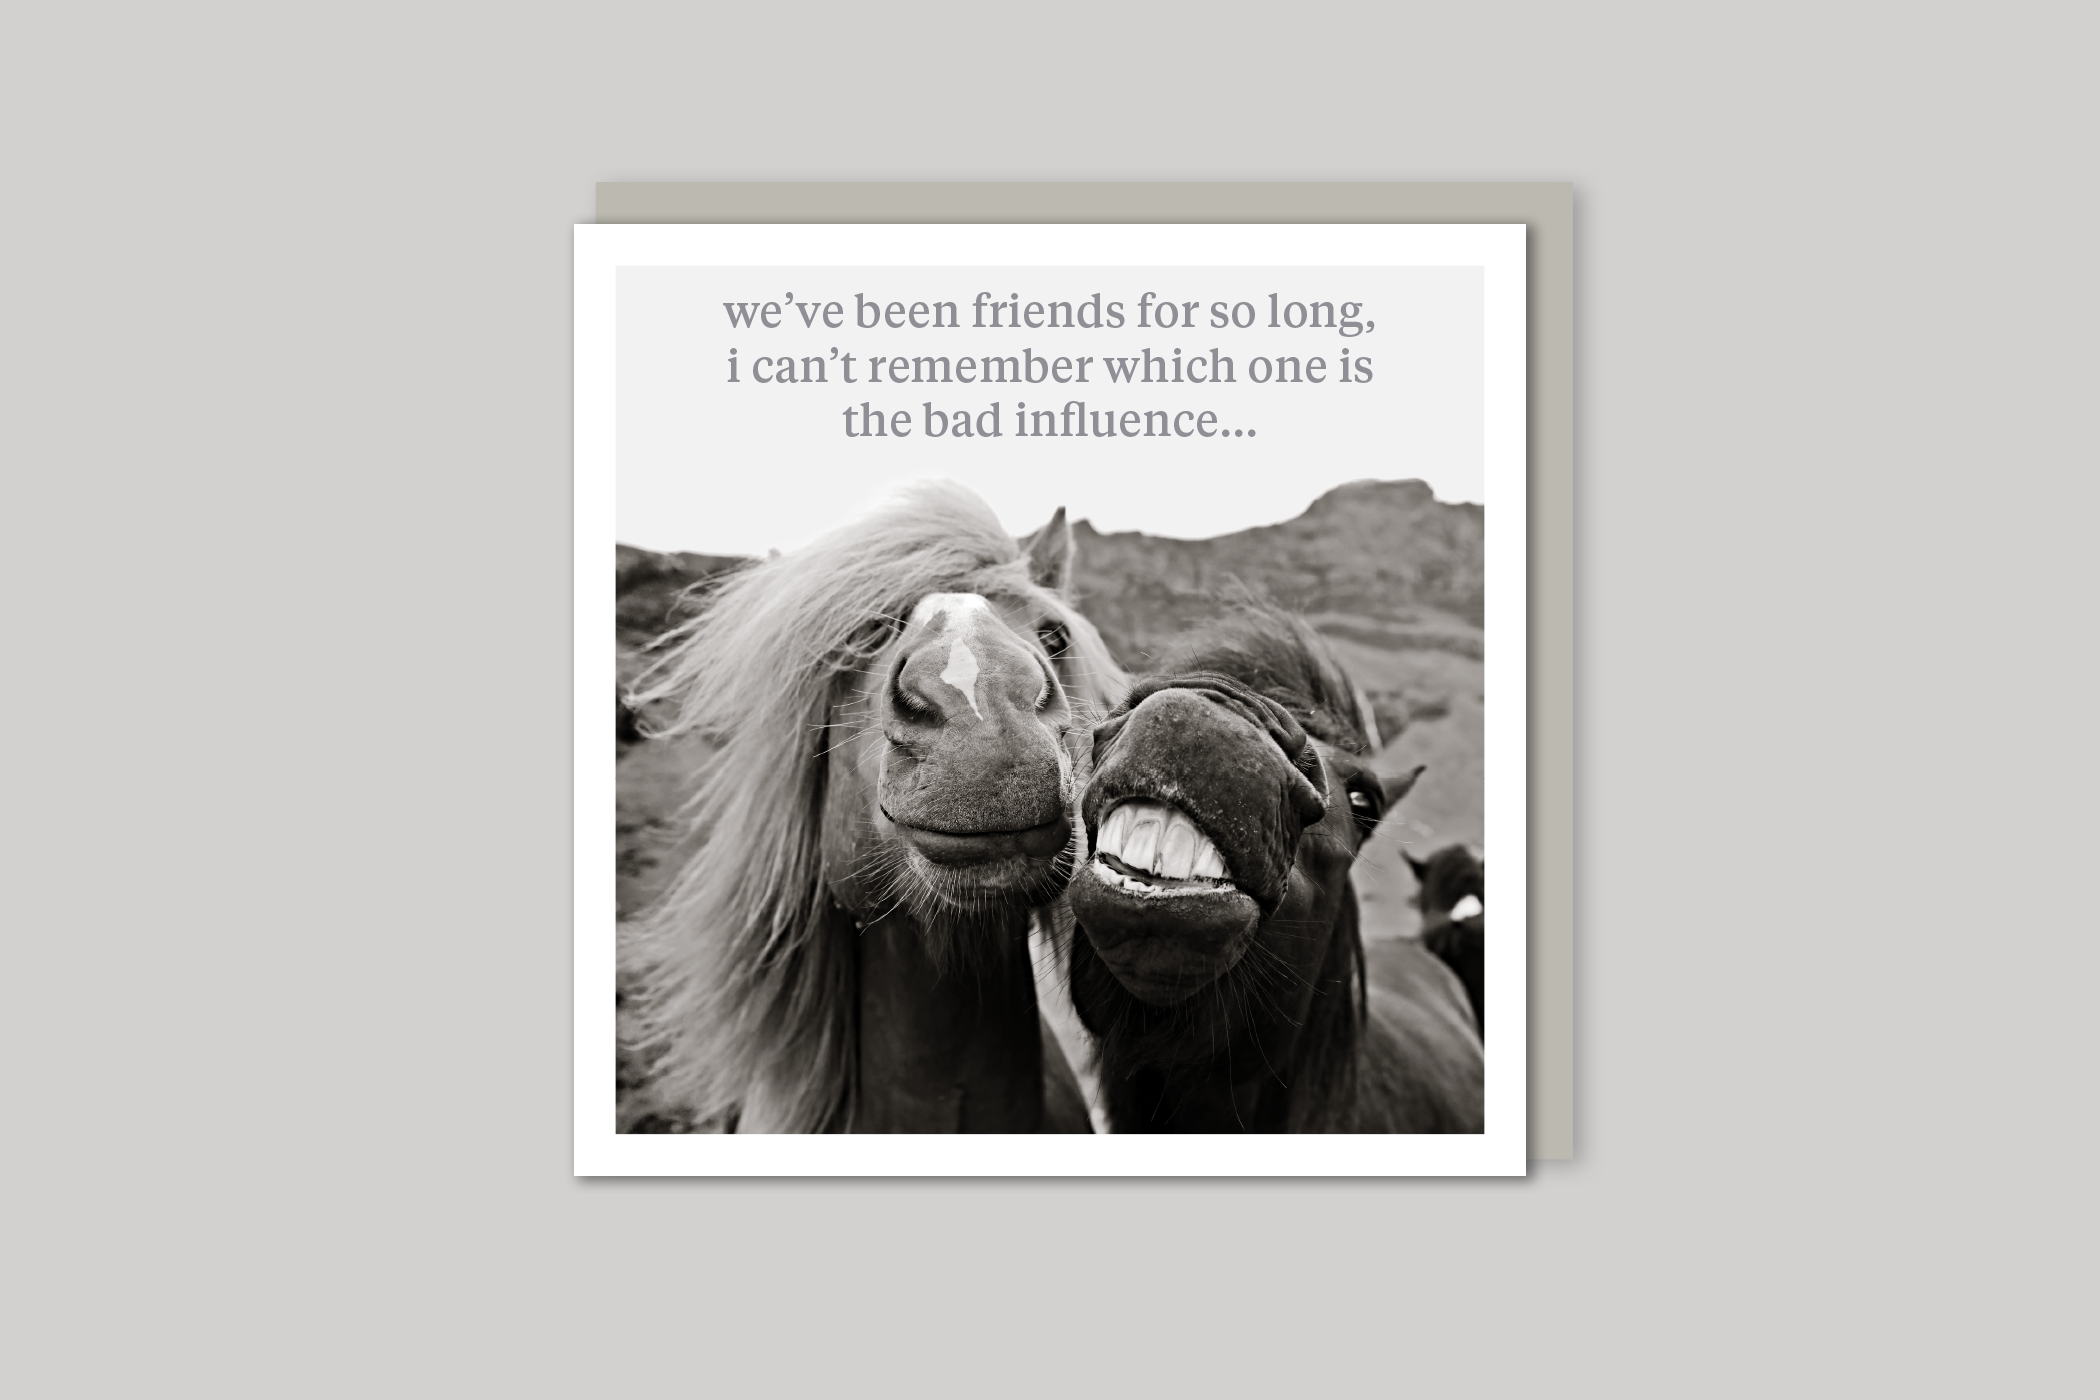 Bad Influence quirky animal portrait from Curious World range of greeting cards by Icon, back page.